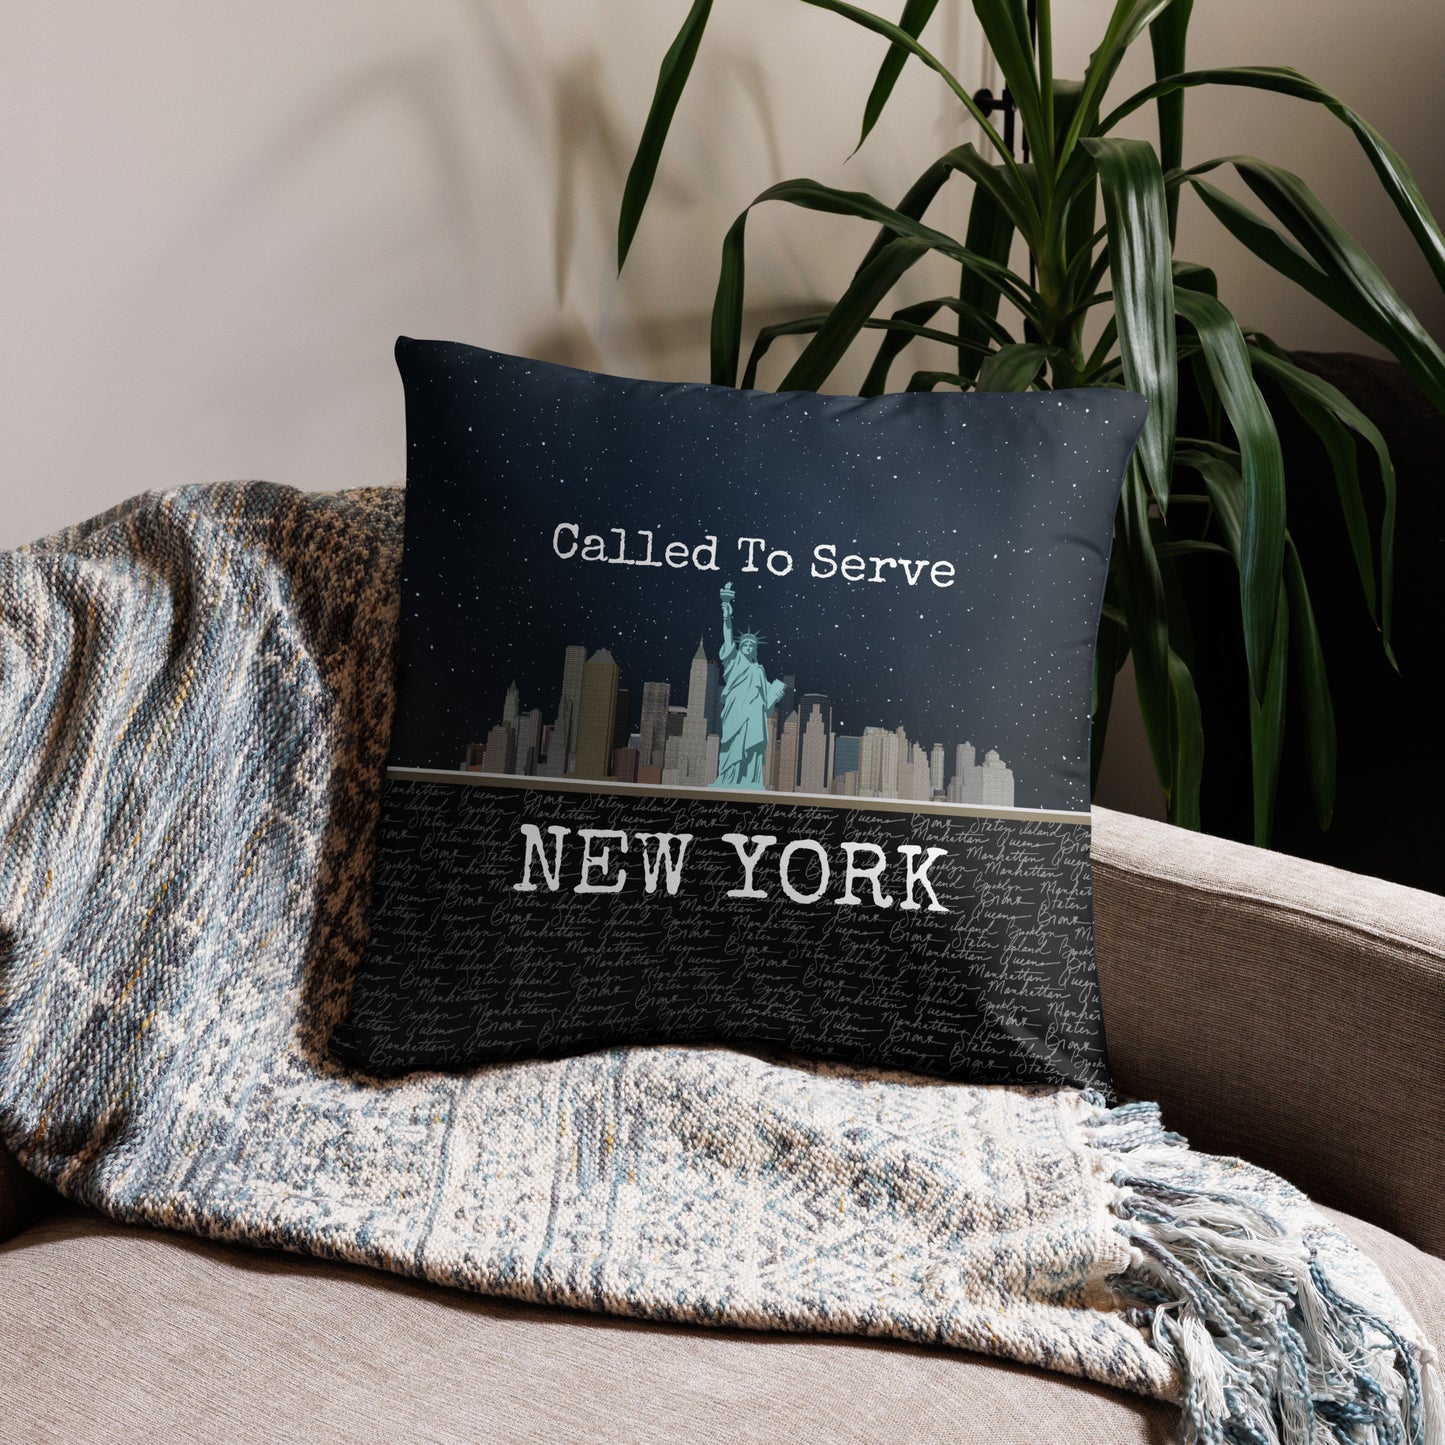 New York Missionary Gift | Best Missionary Gift Ideas | Mission Call Gifts | Called to Serve Gifts | Missionary Mom Gifts | Best Latter Day Saint Gifts | LDS Missionary Gifts | New York Home Decor